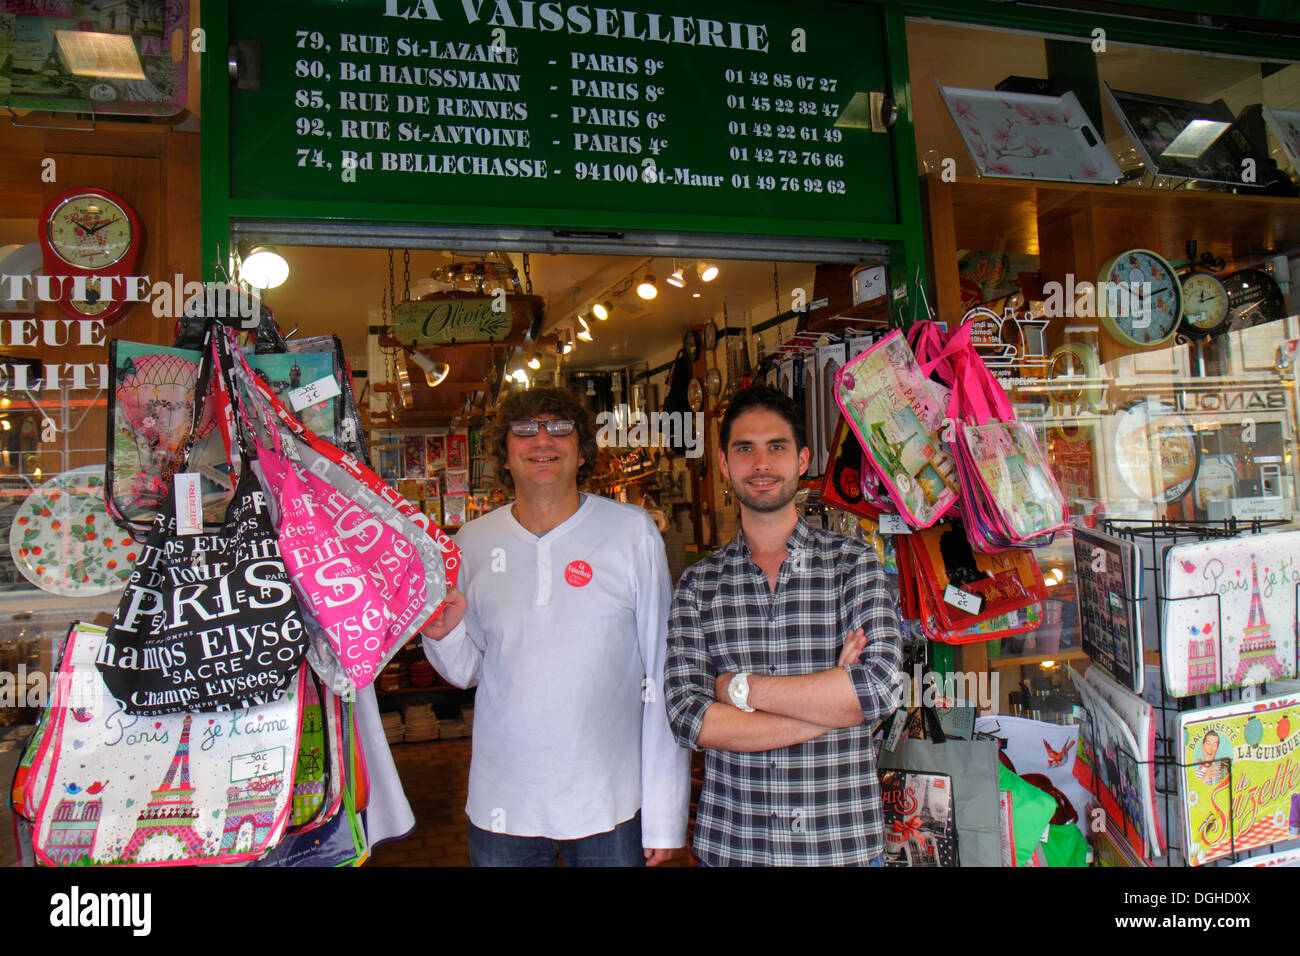 Paris France,9th arrondissement,Rue Saint-Lazare,La Vaissellerie,gift store,household items,man men male,employee worker workers working staff,manager Stock Photo